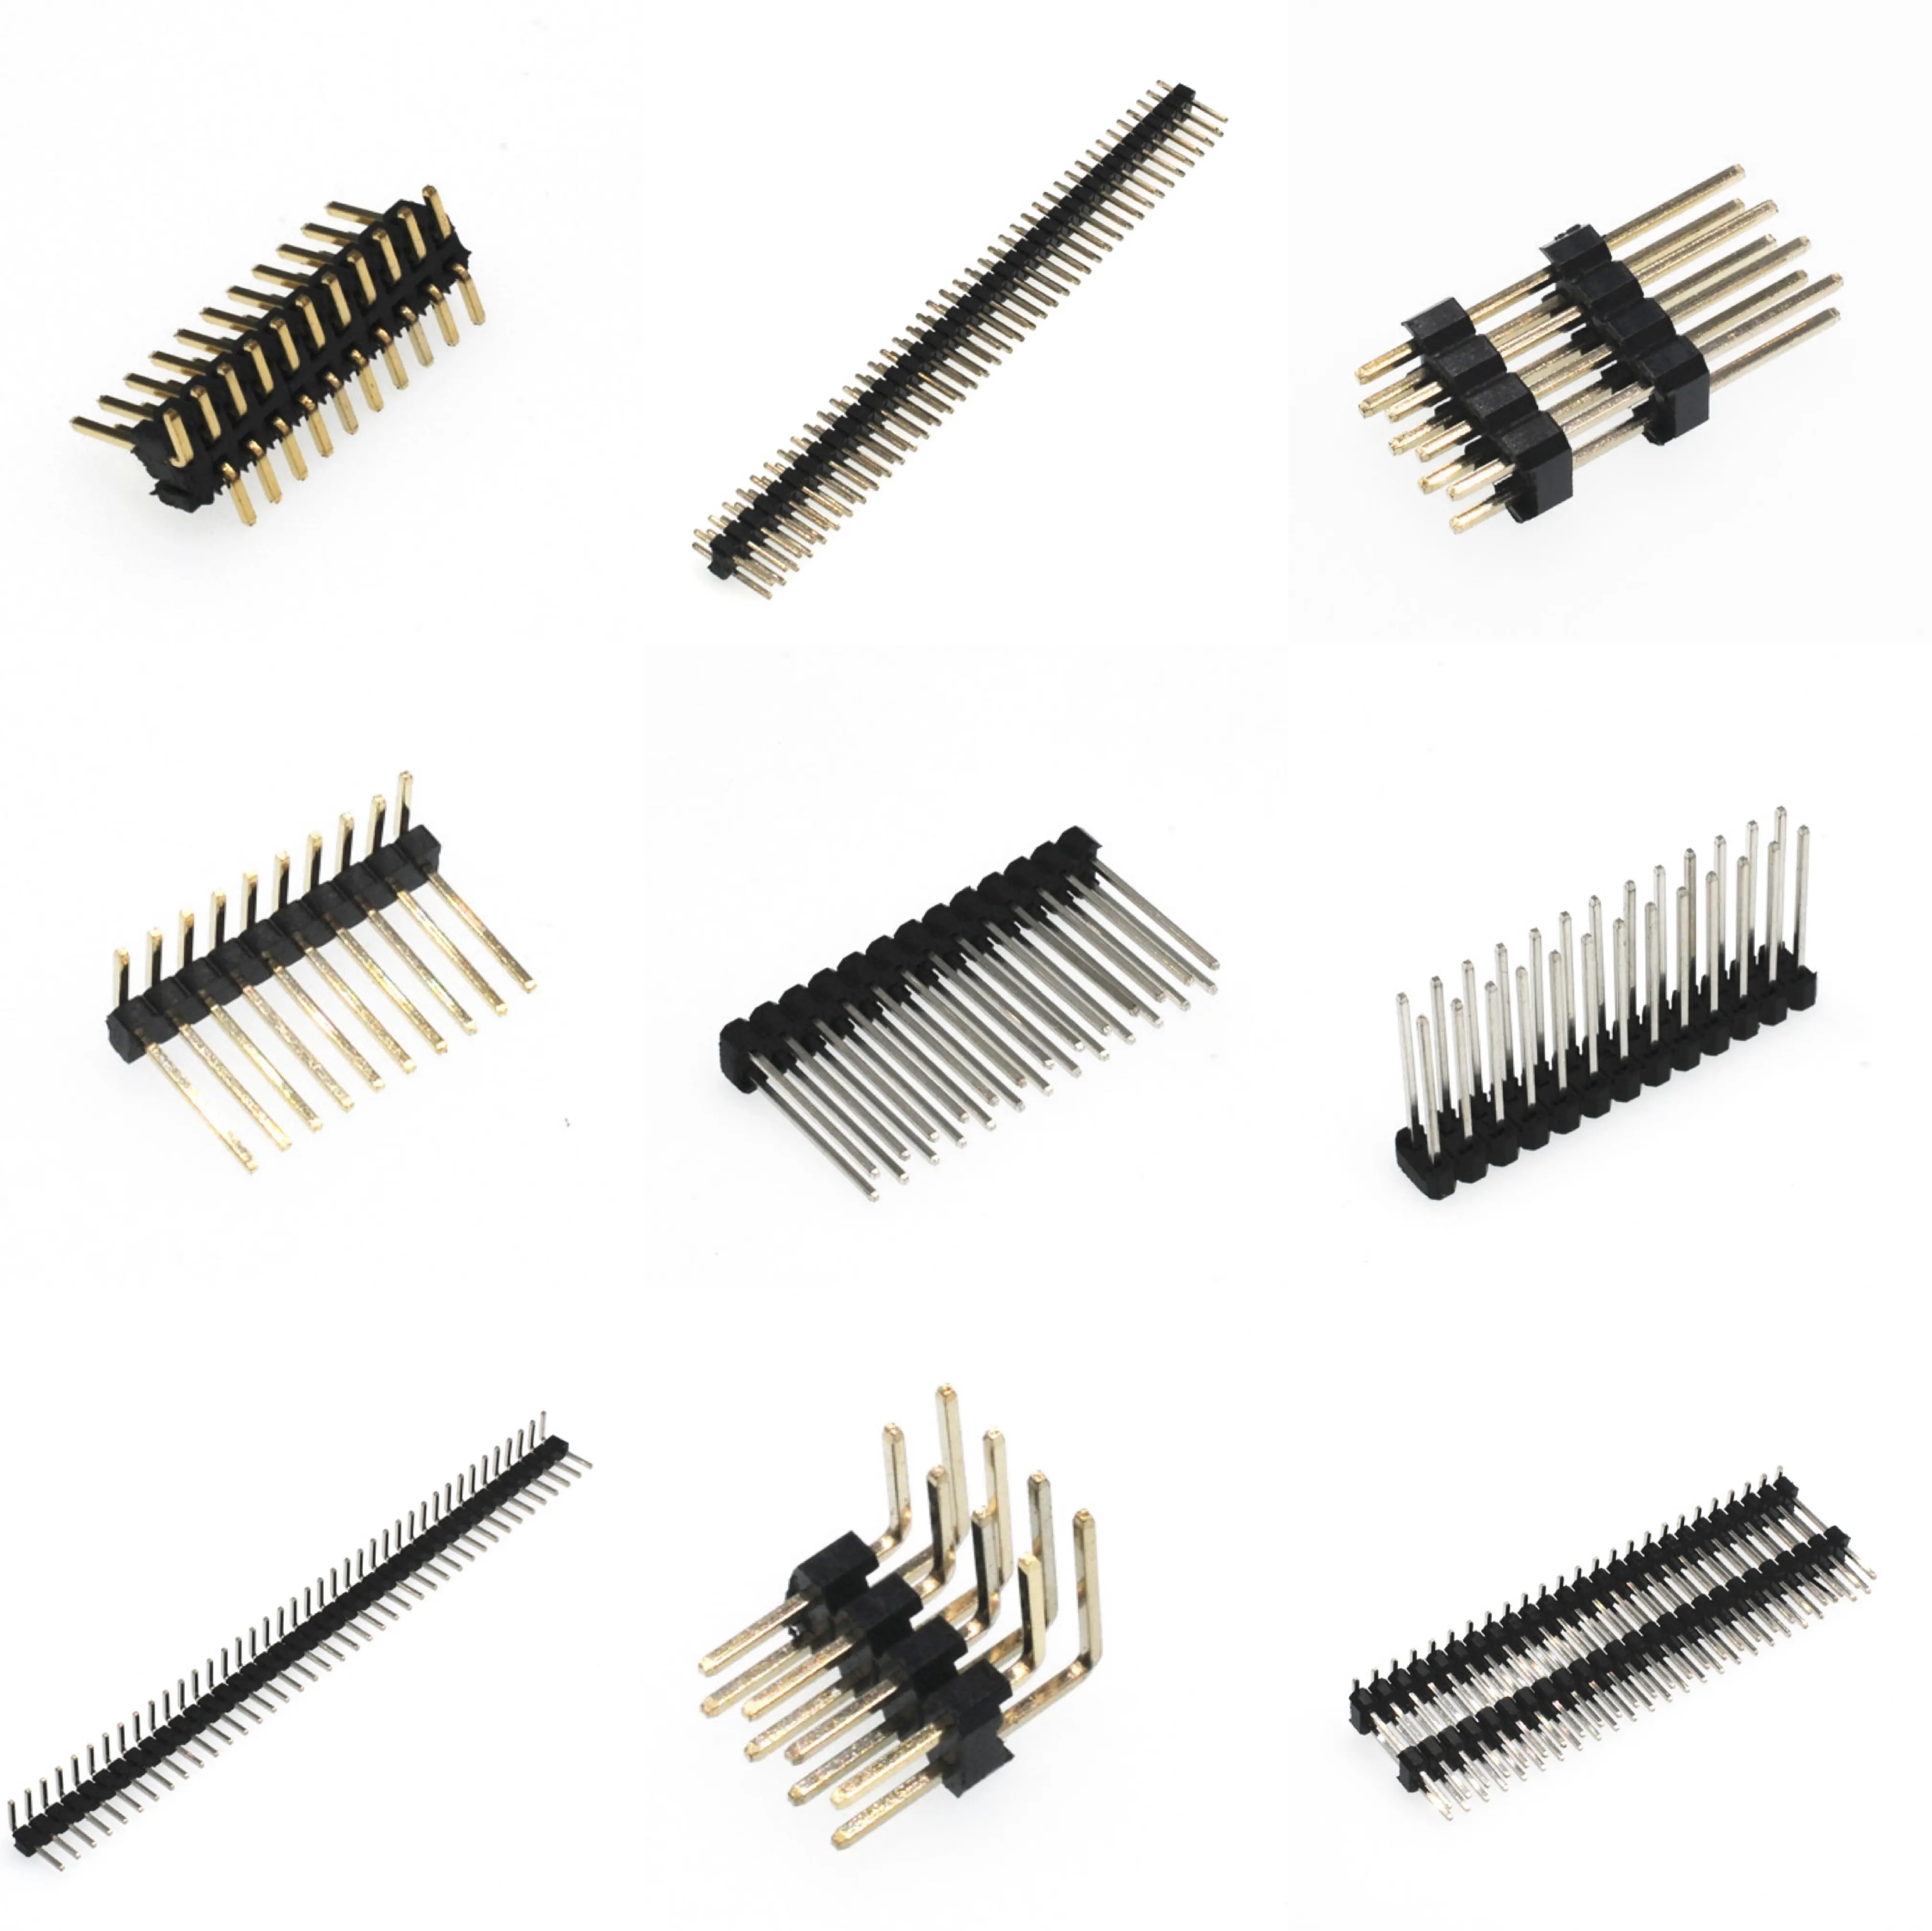 1.5mm 5.08mm right angle pitch single double row 2.54mm female pin header connector